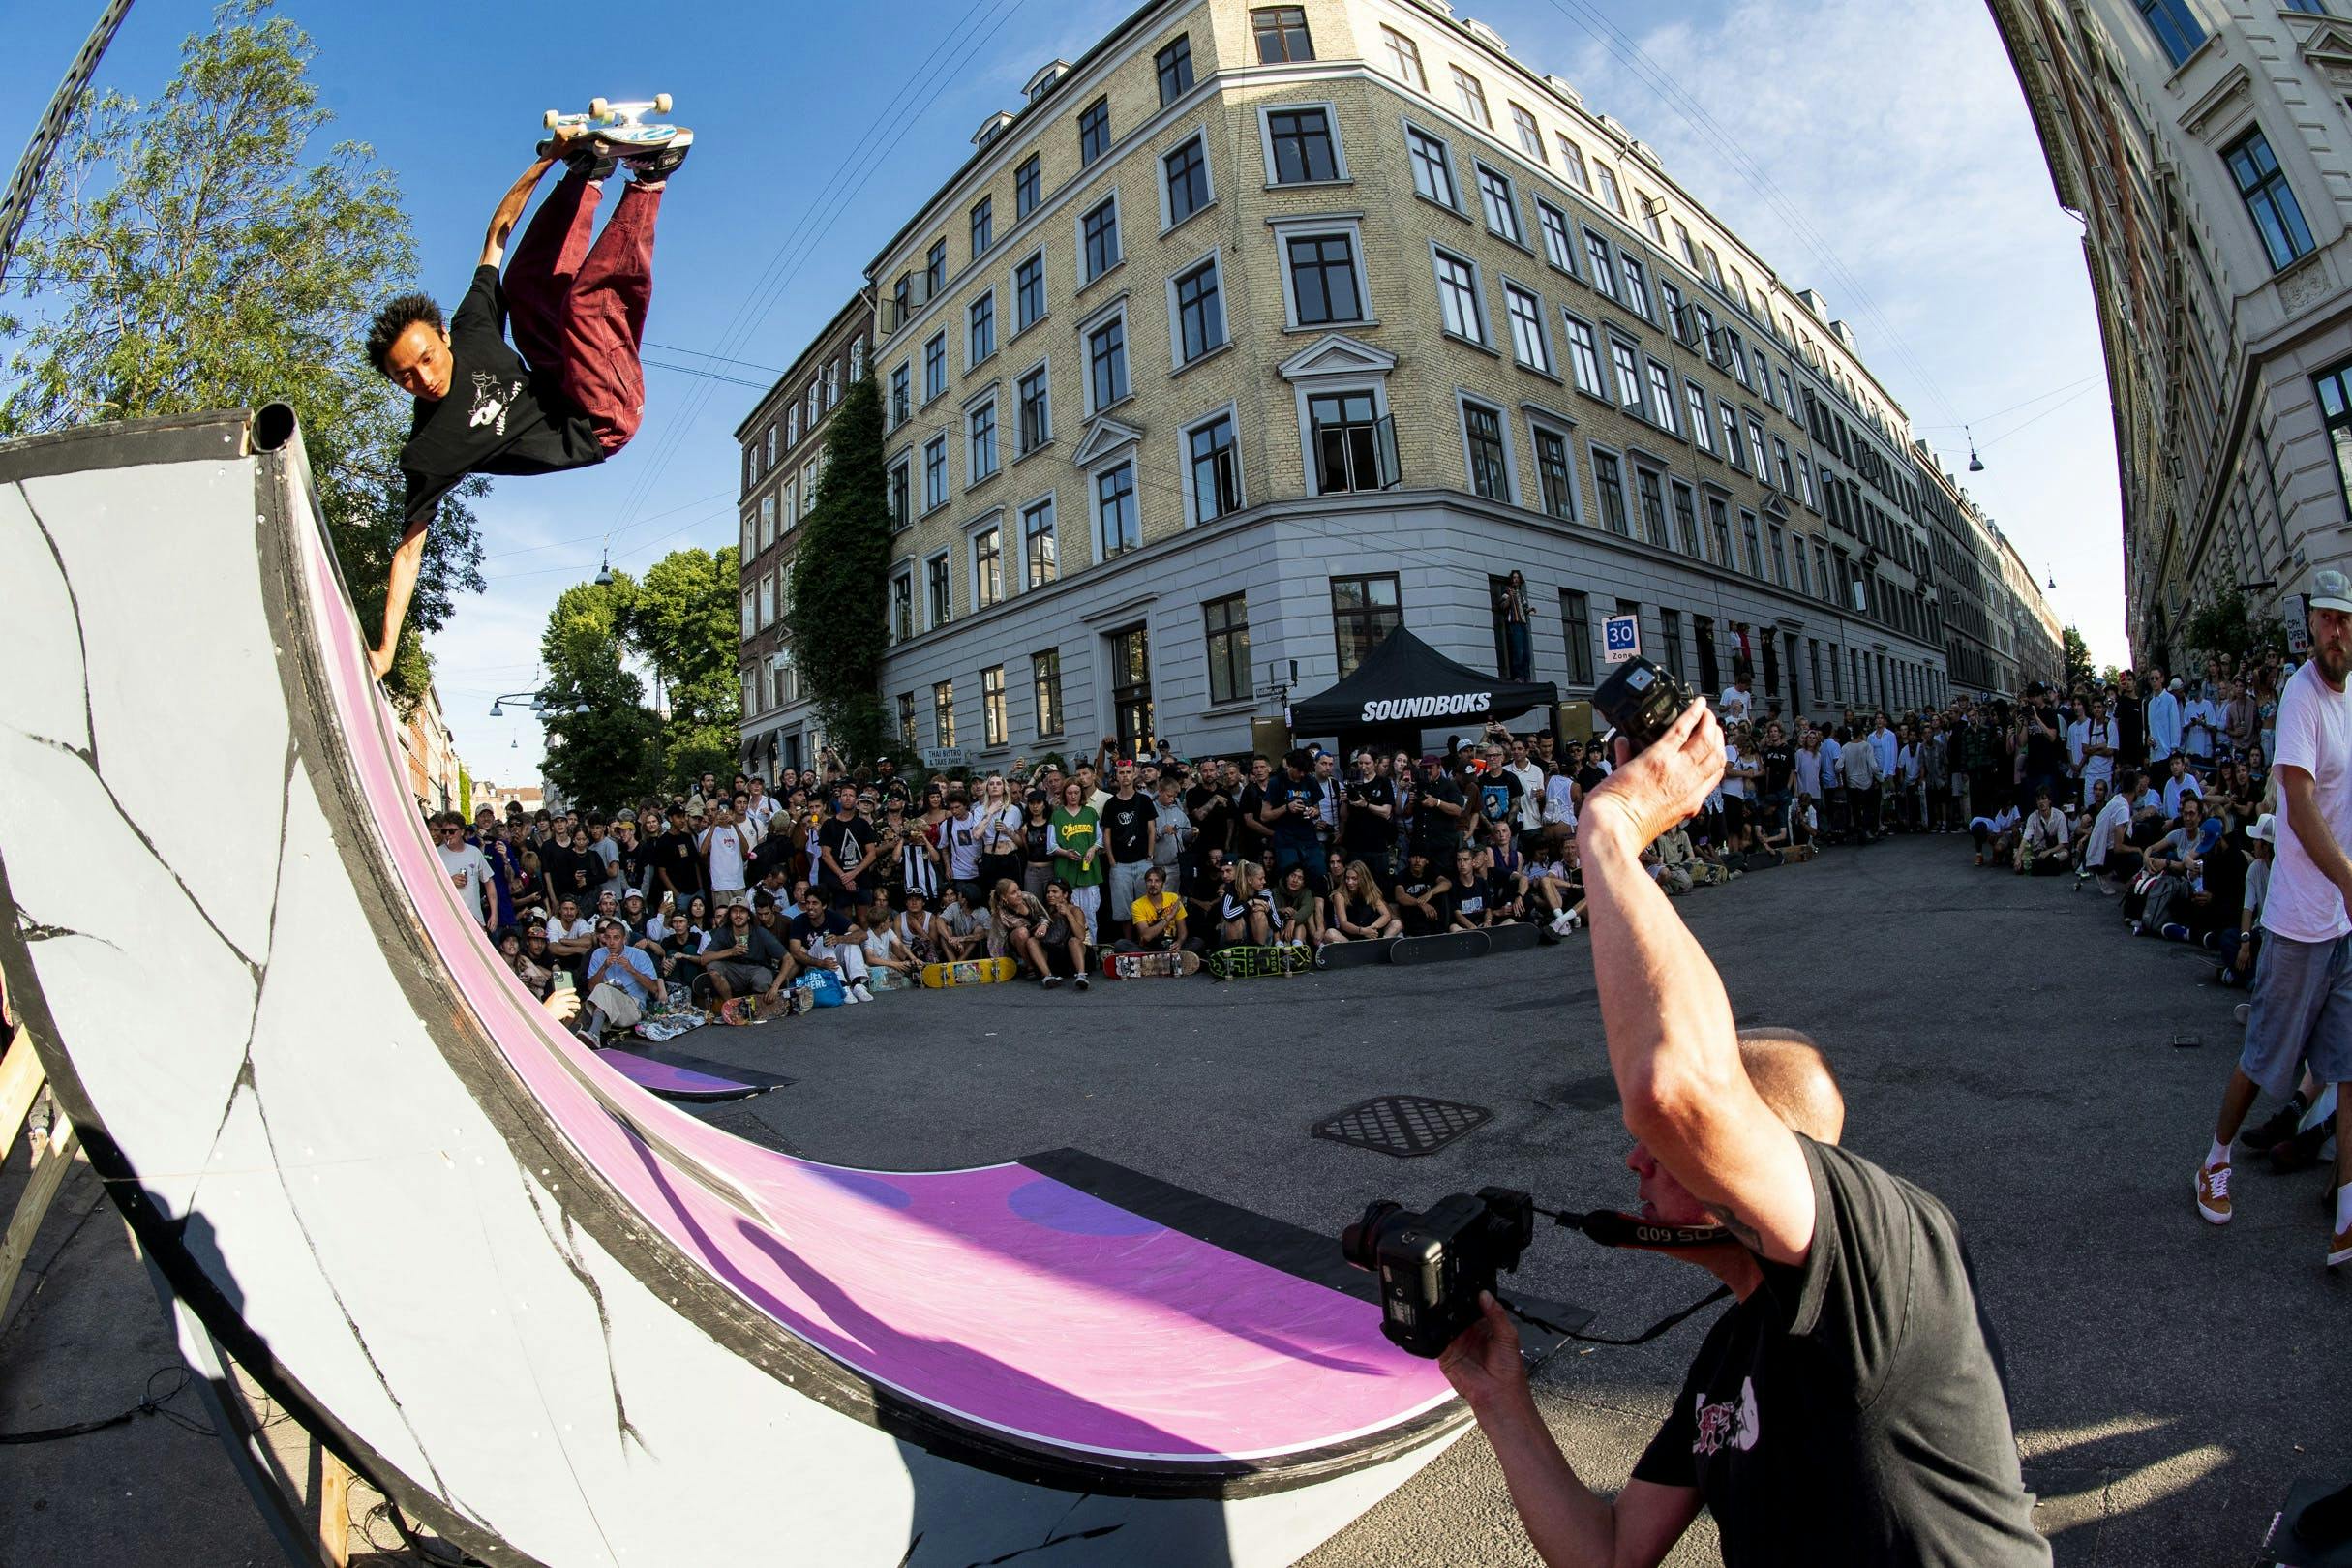 HAND PLANT in CPH OPEN 2023/ Shot from "One upenhagen open" event. Did you see Takeshi show?/ Cph open内 Oneupenhagen openイベントにて。君はタケシショーを見ましたか？